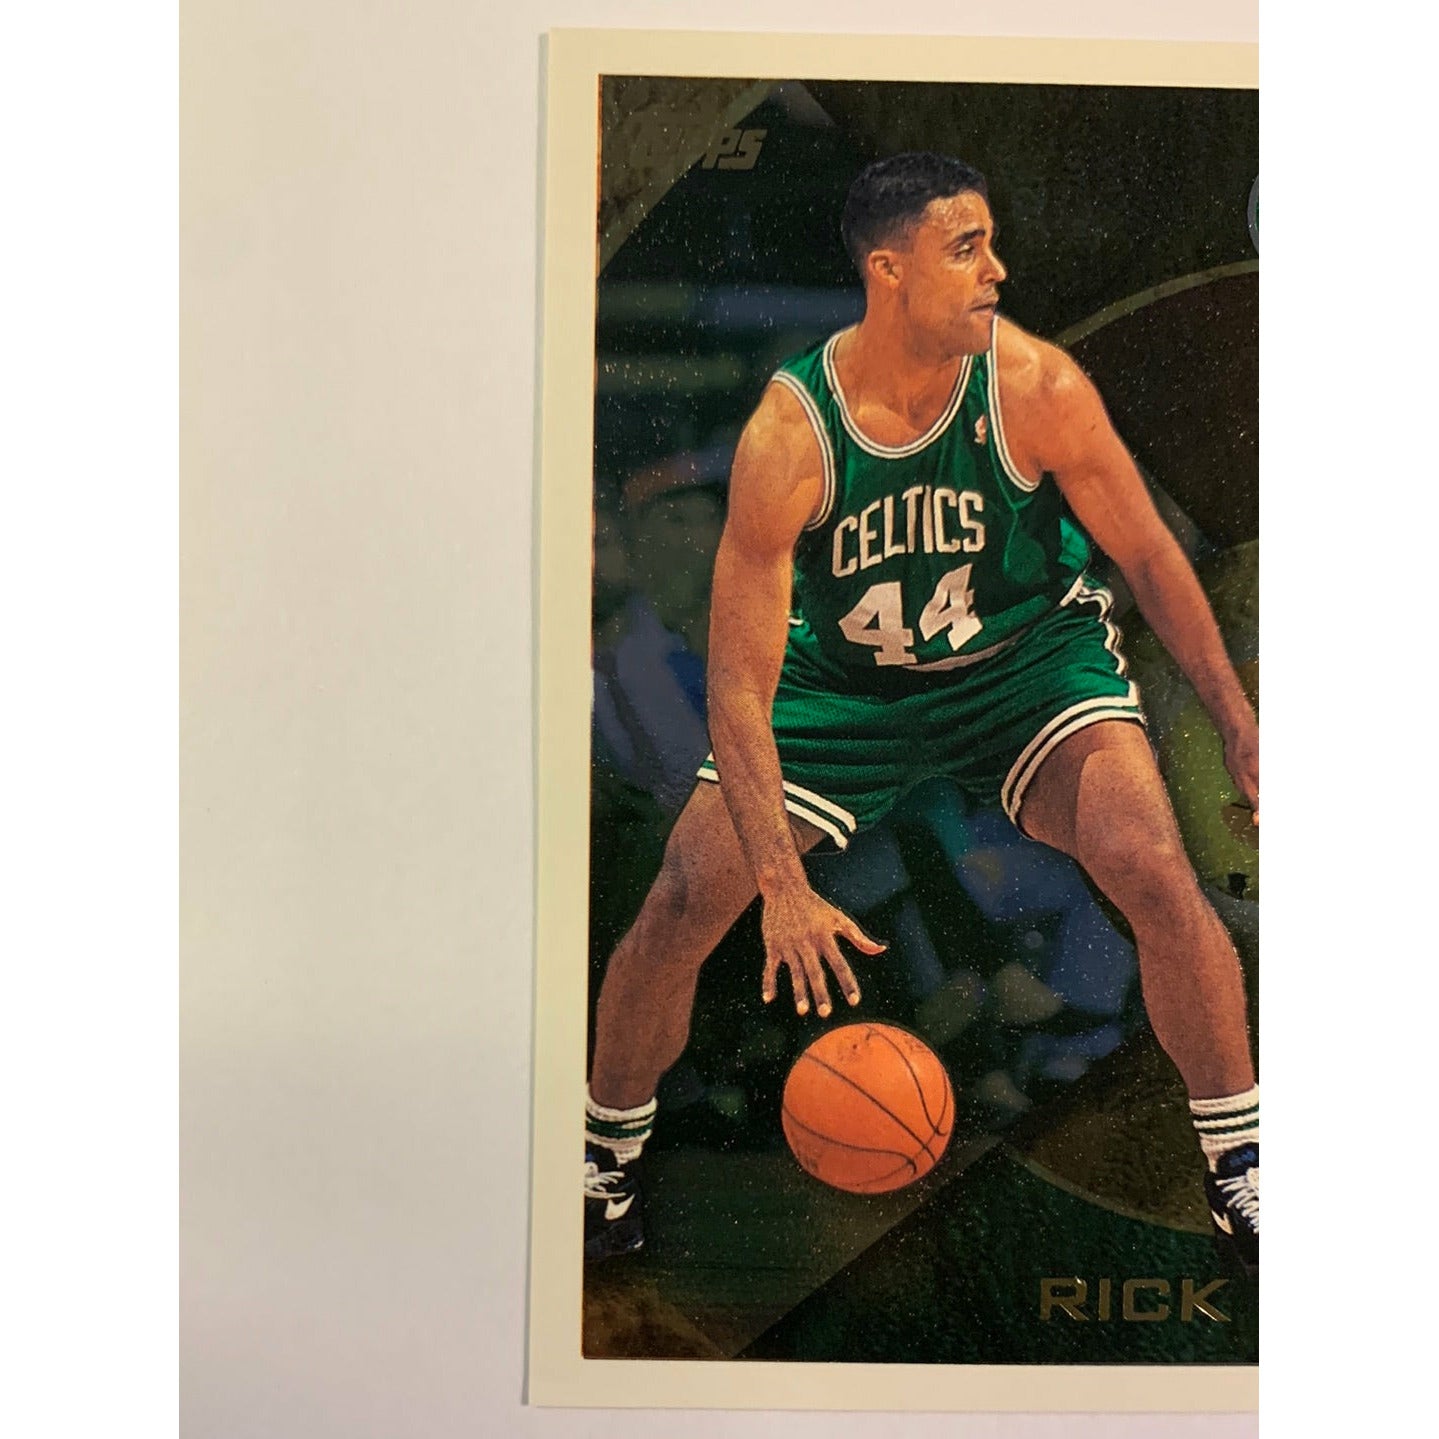  1995-96 Topps Rick Fox Foriegn Legion Gold Foil - Because He’s from Canada 🤣😂🤣  Local Legends Cards & Collectibles